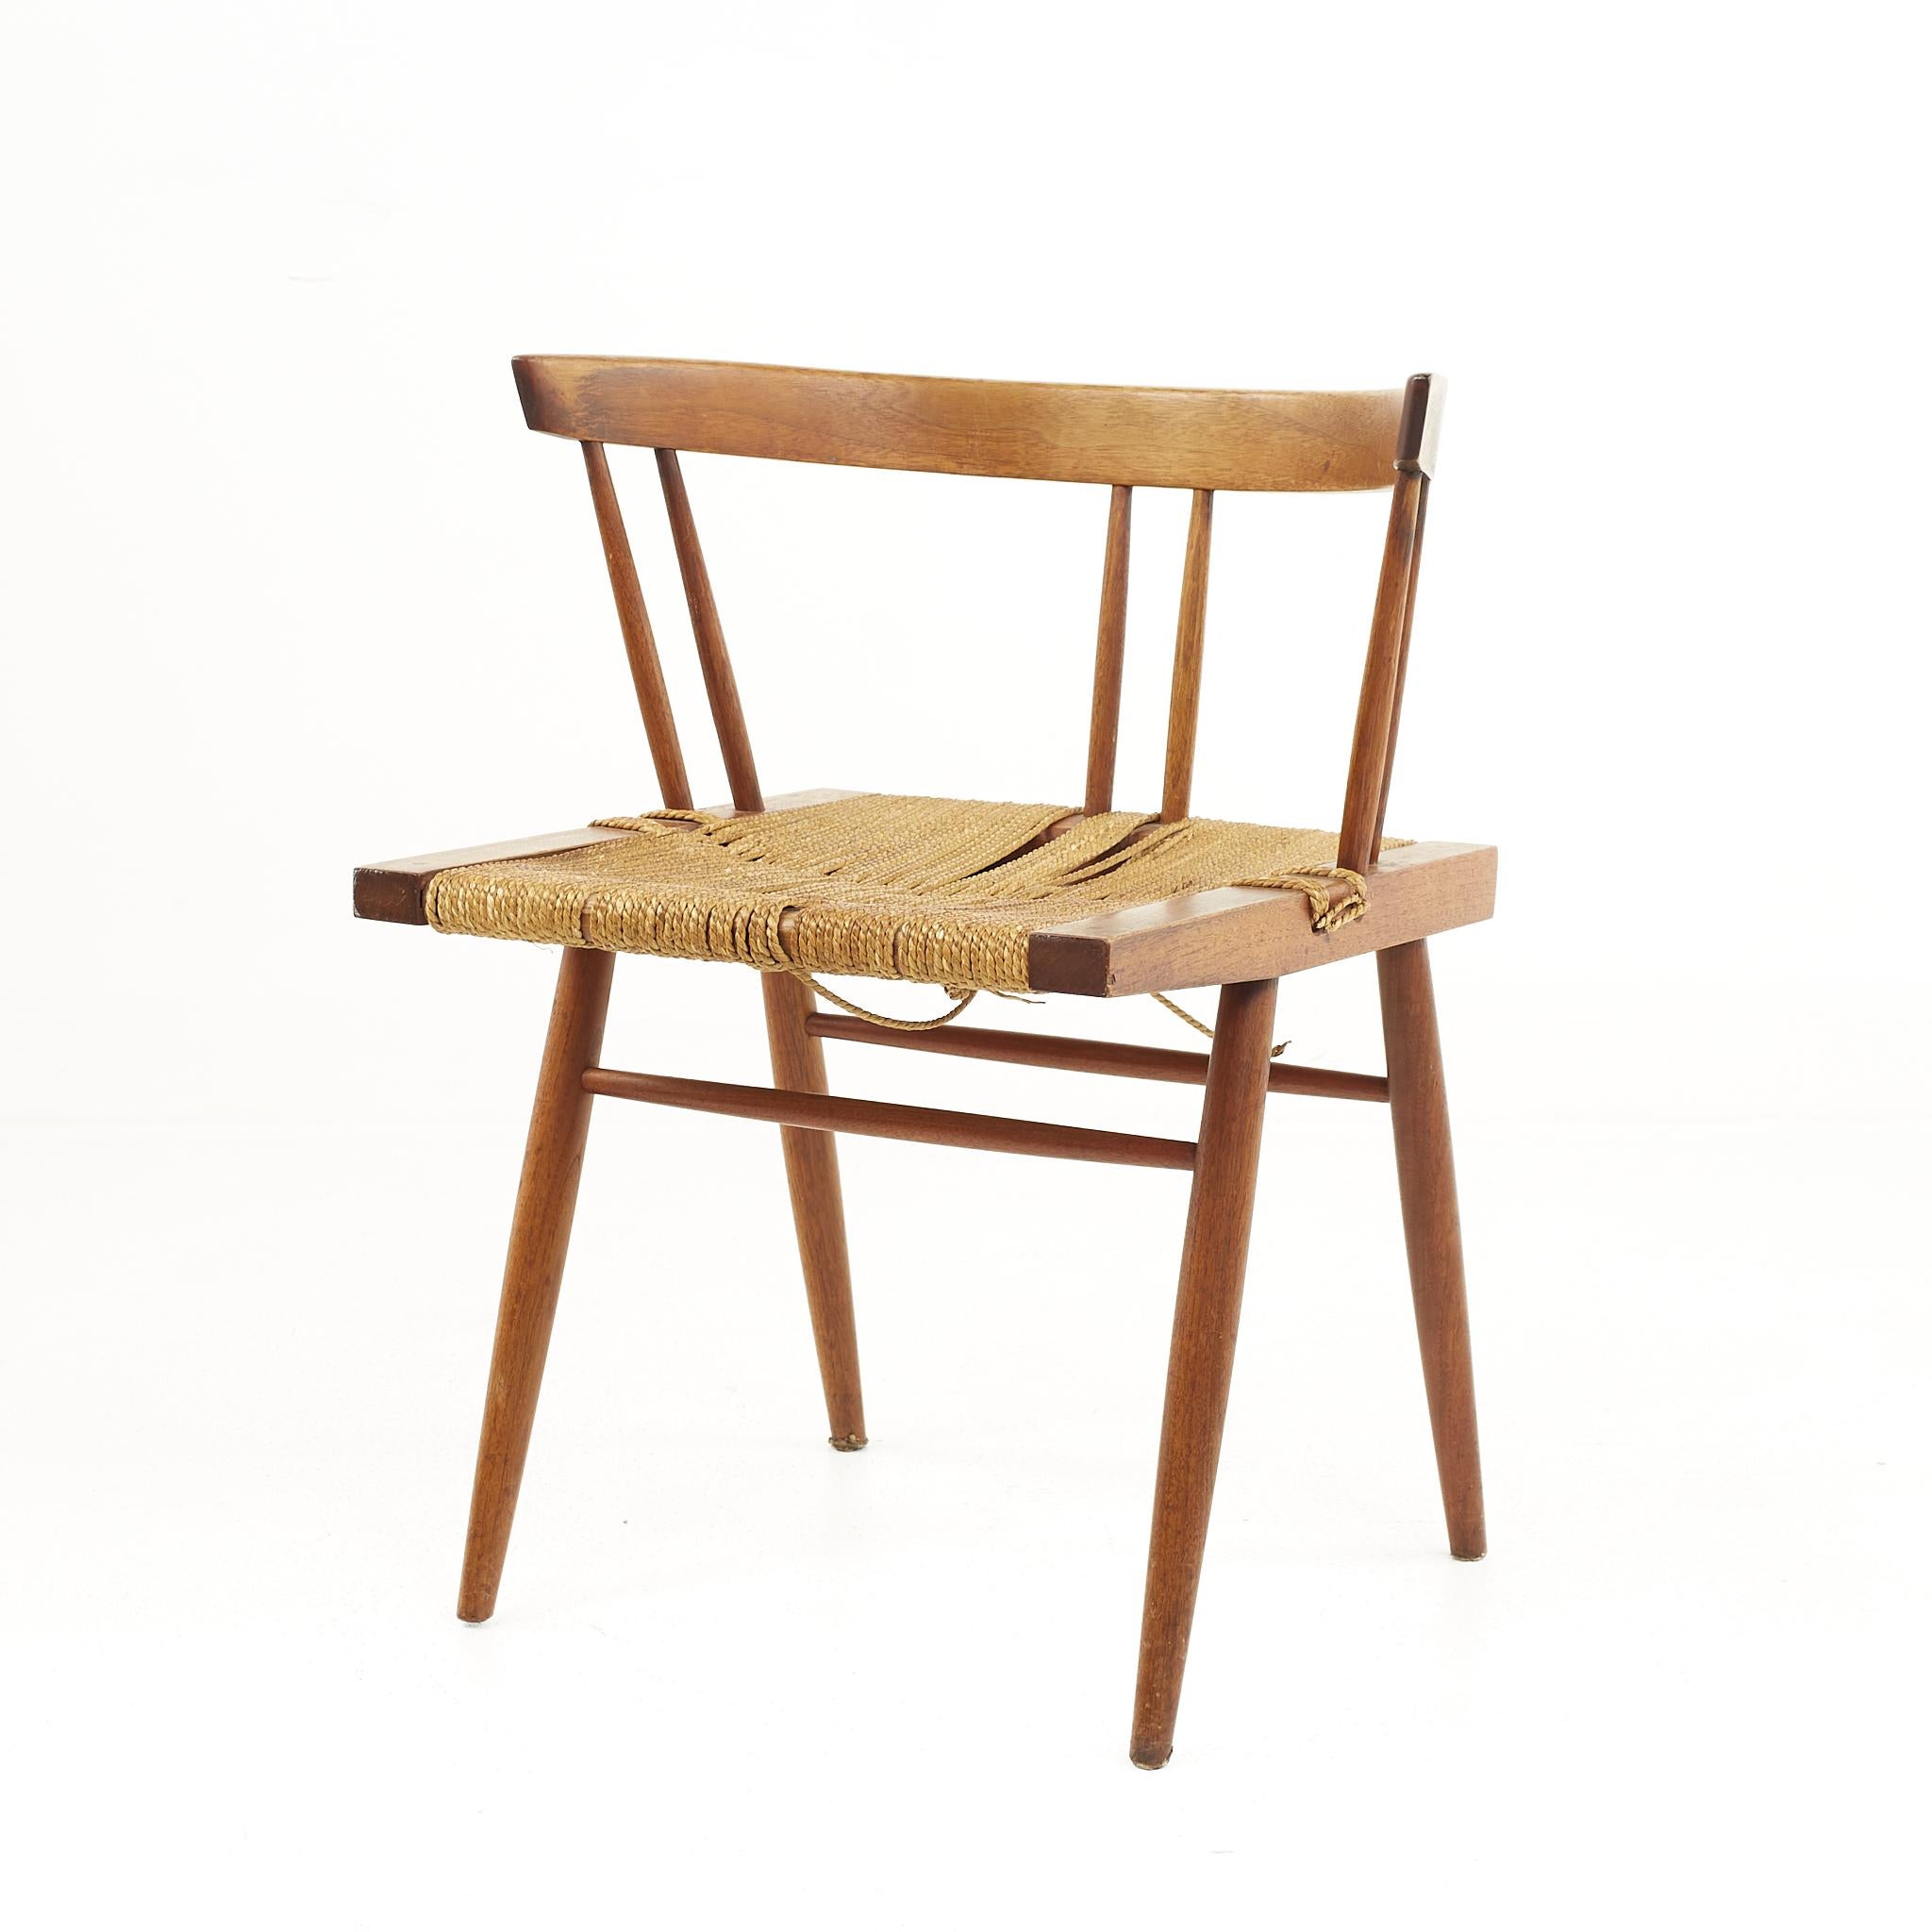 Late 20th Century George Nakashima Mid Century Grass Chairm, a Pair